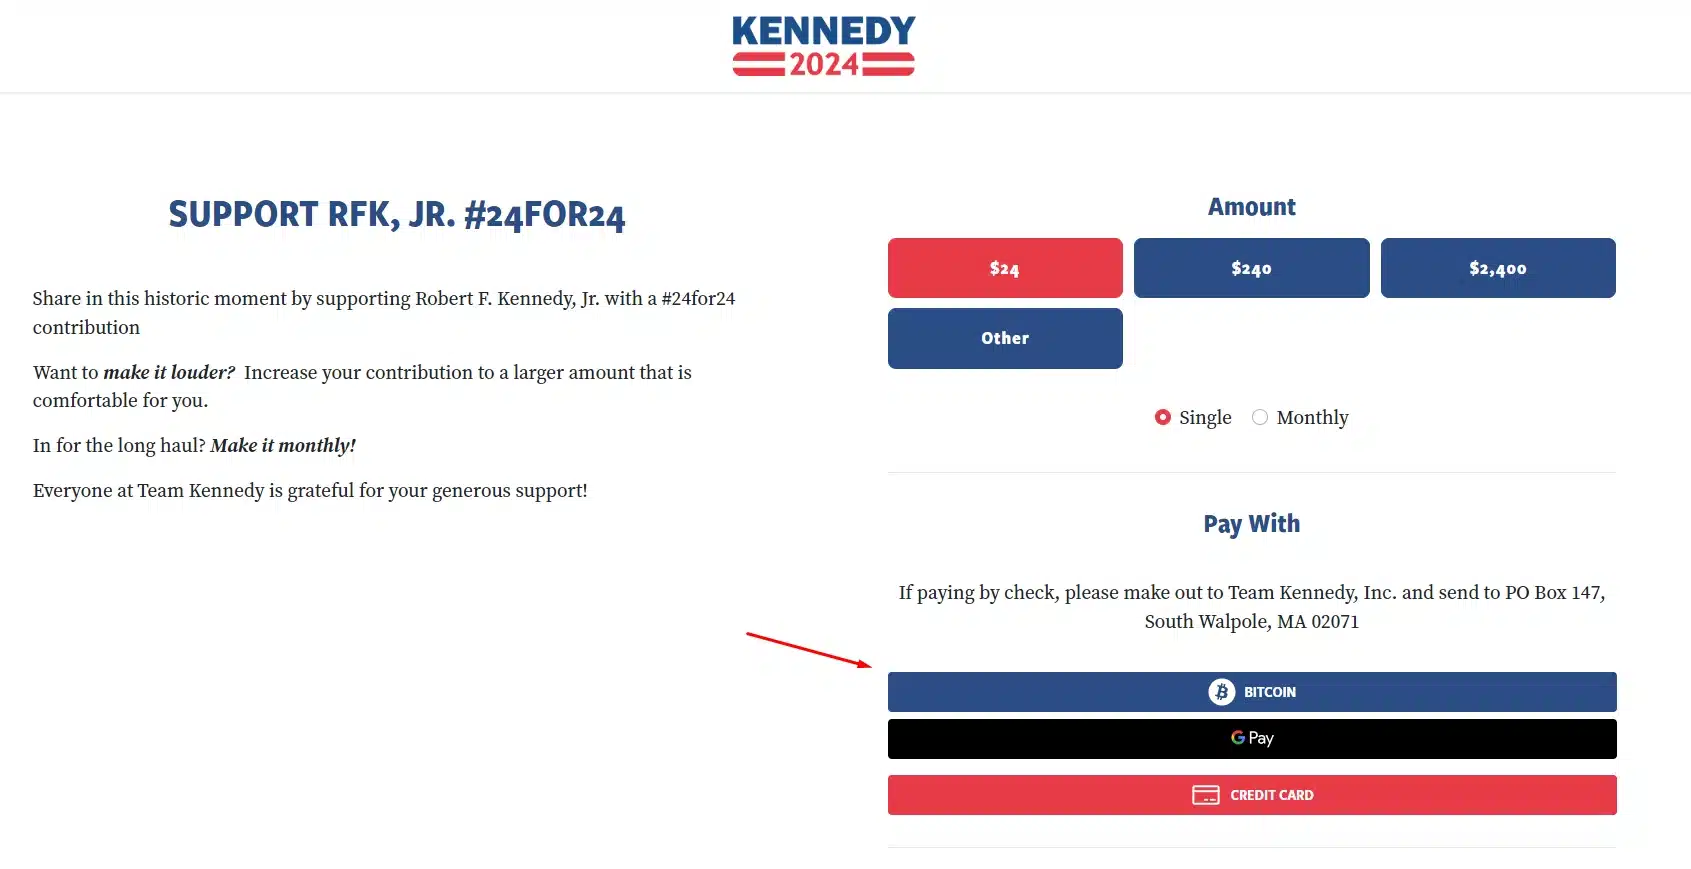 Kennedy Bitcoin donation page